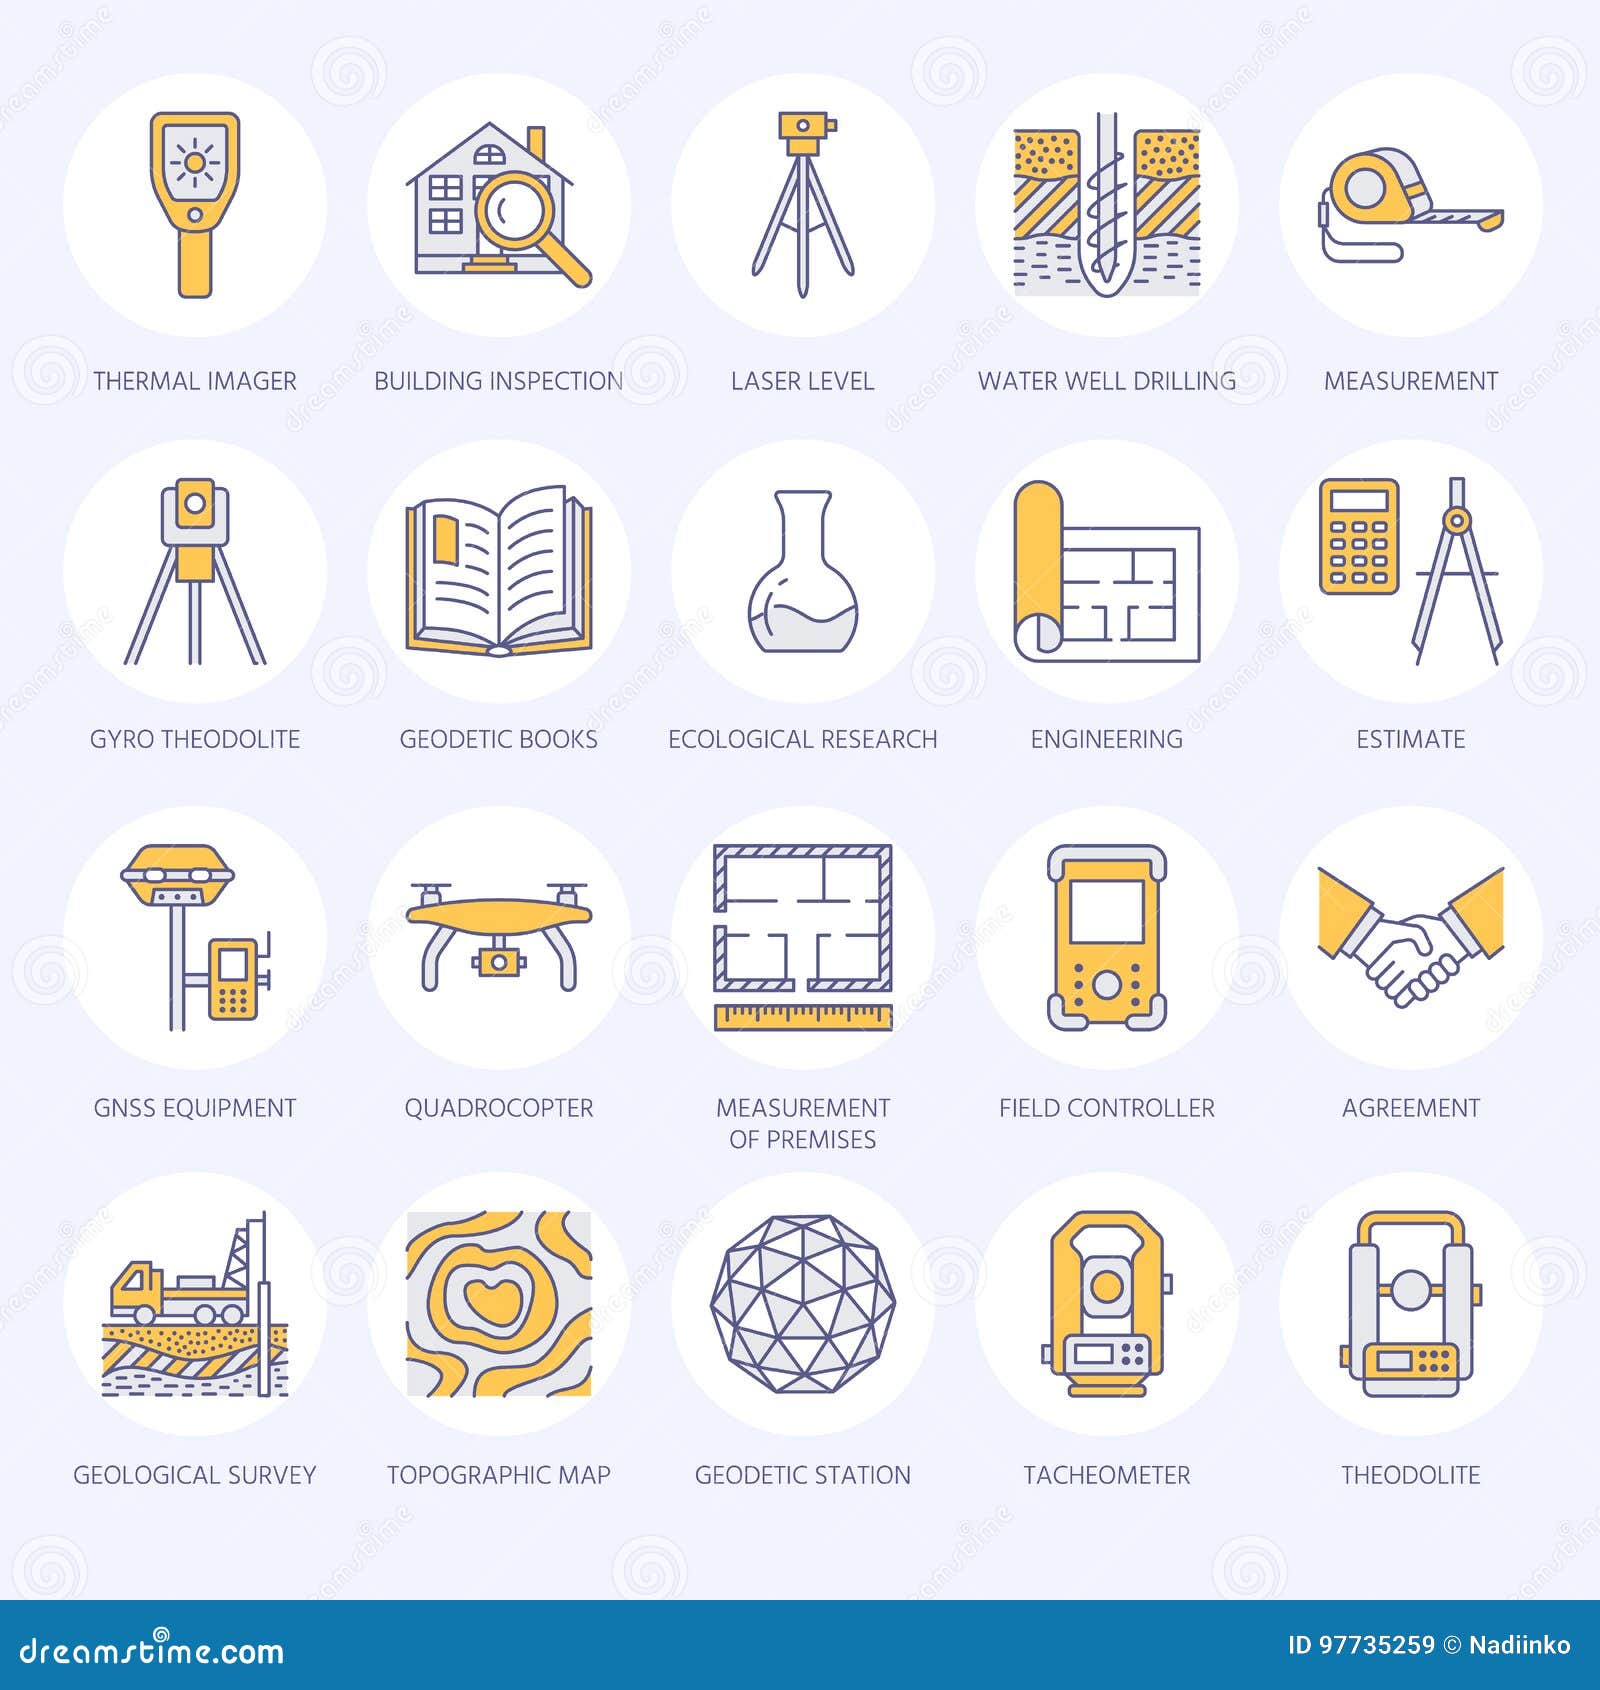 Theodolite survey owner s guide to business and industrial